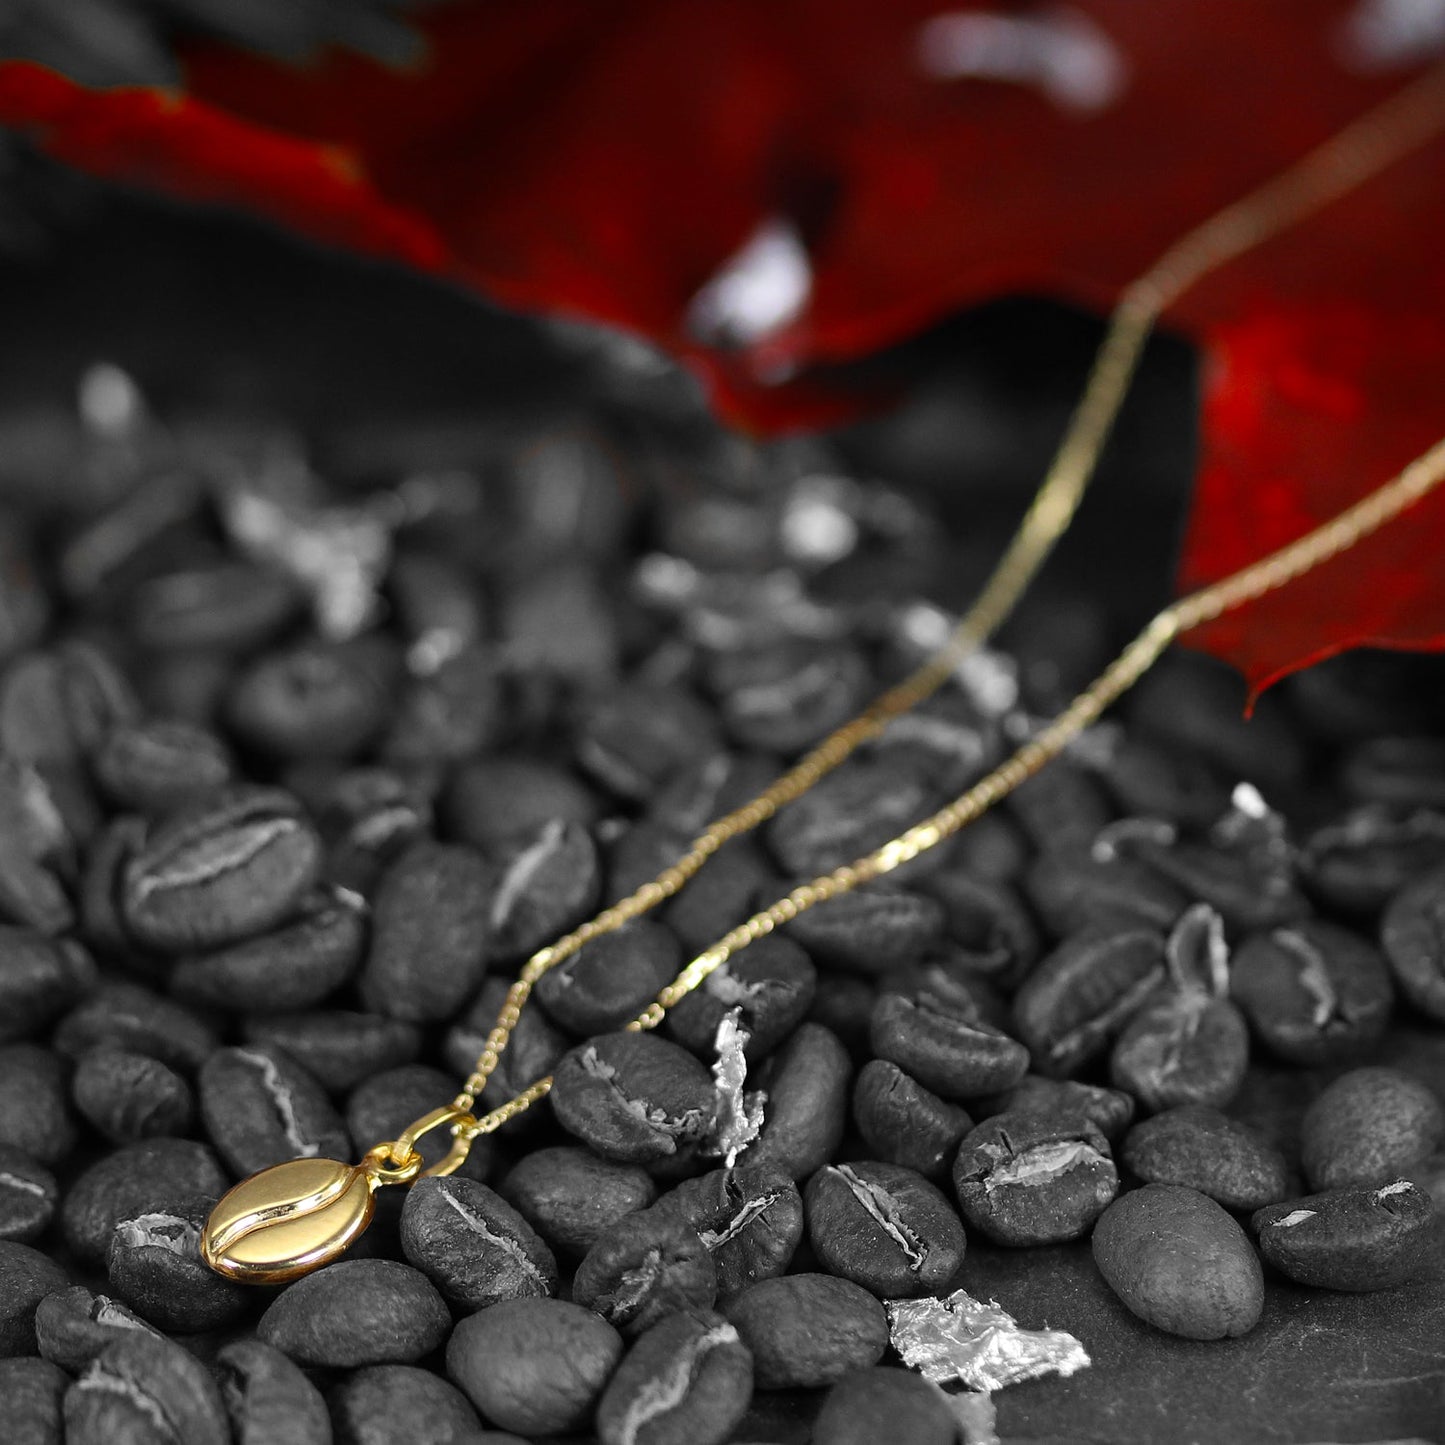 9ct Gold Coffee Bean Necklace - 16 - 20 Inches